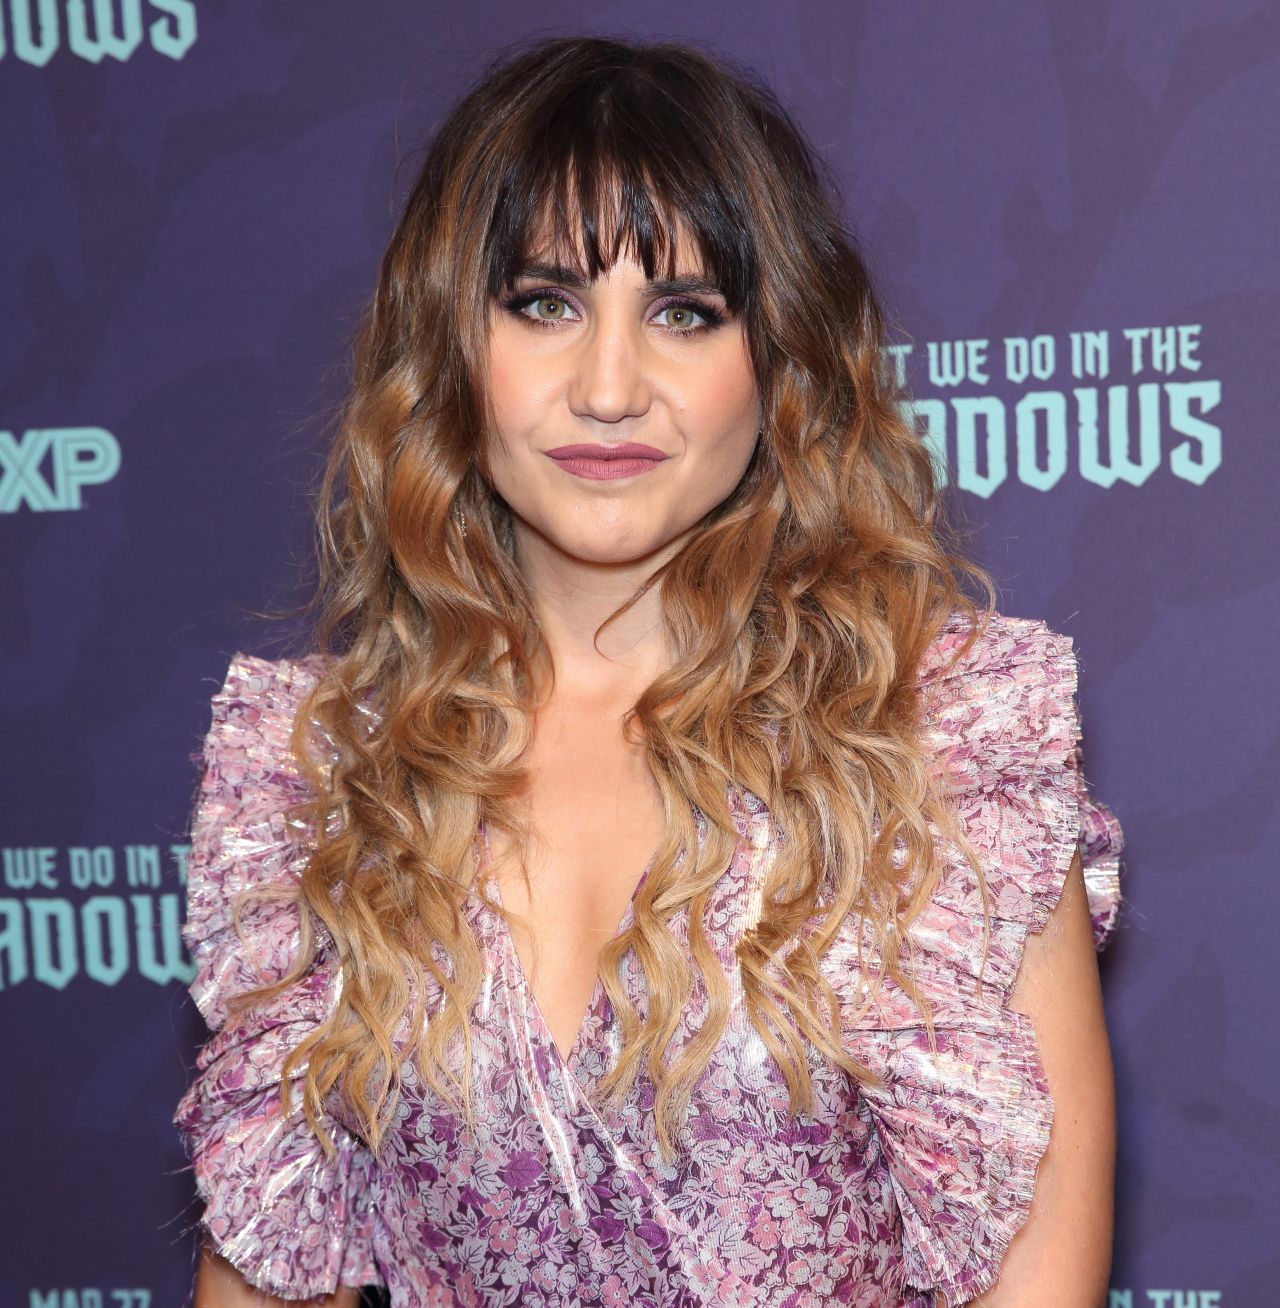 NATASIA DEMETRIOU at What We Do in the Shadows Premiere in 